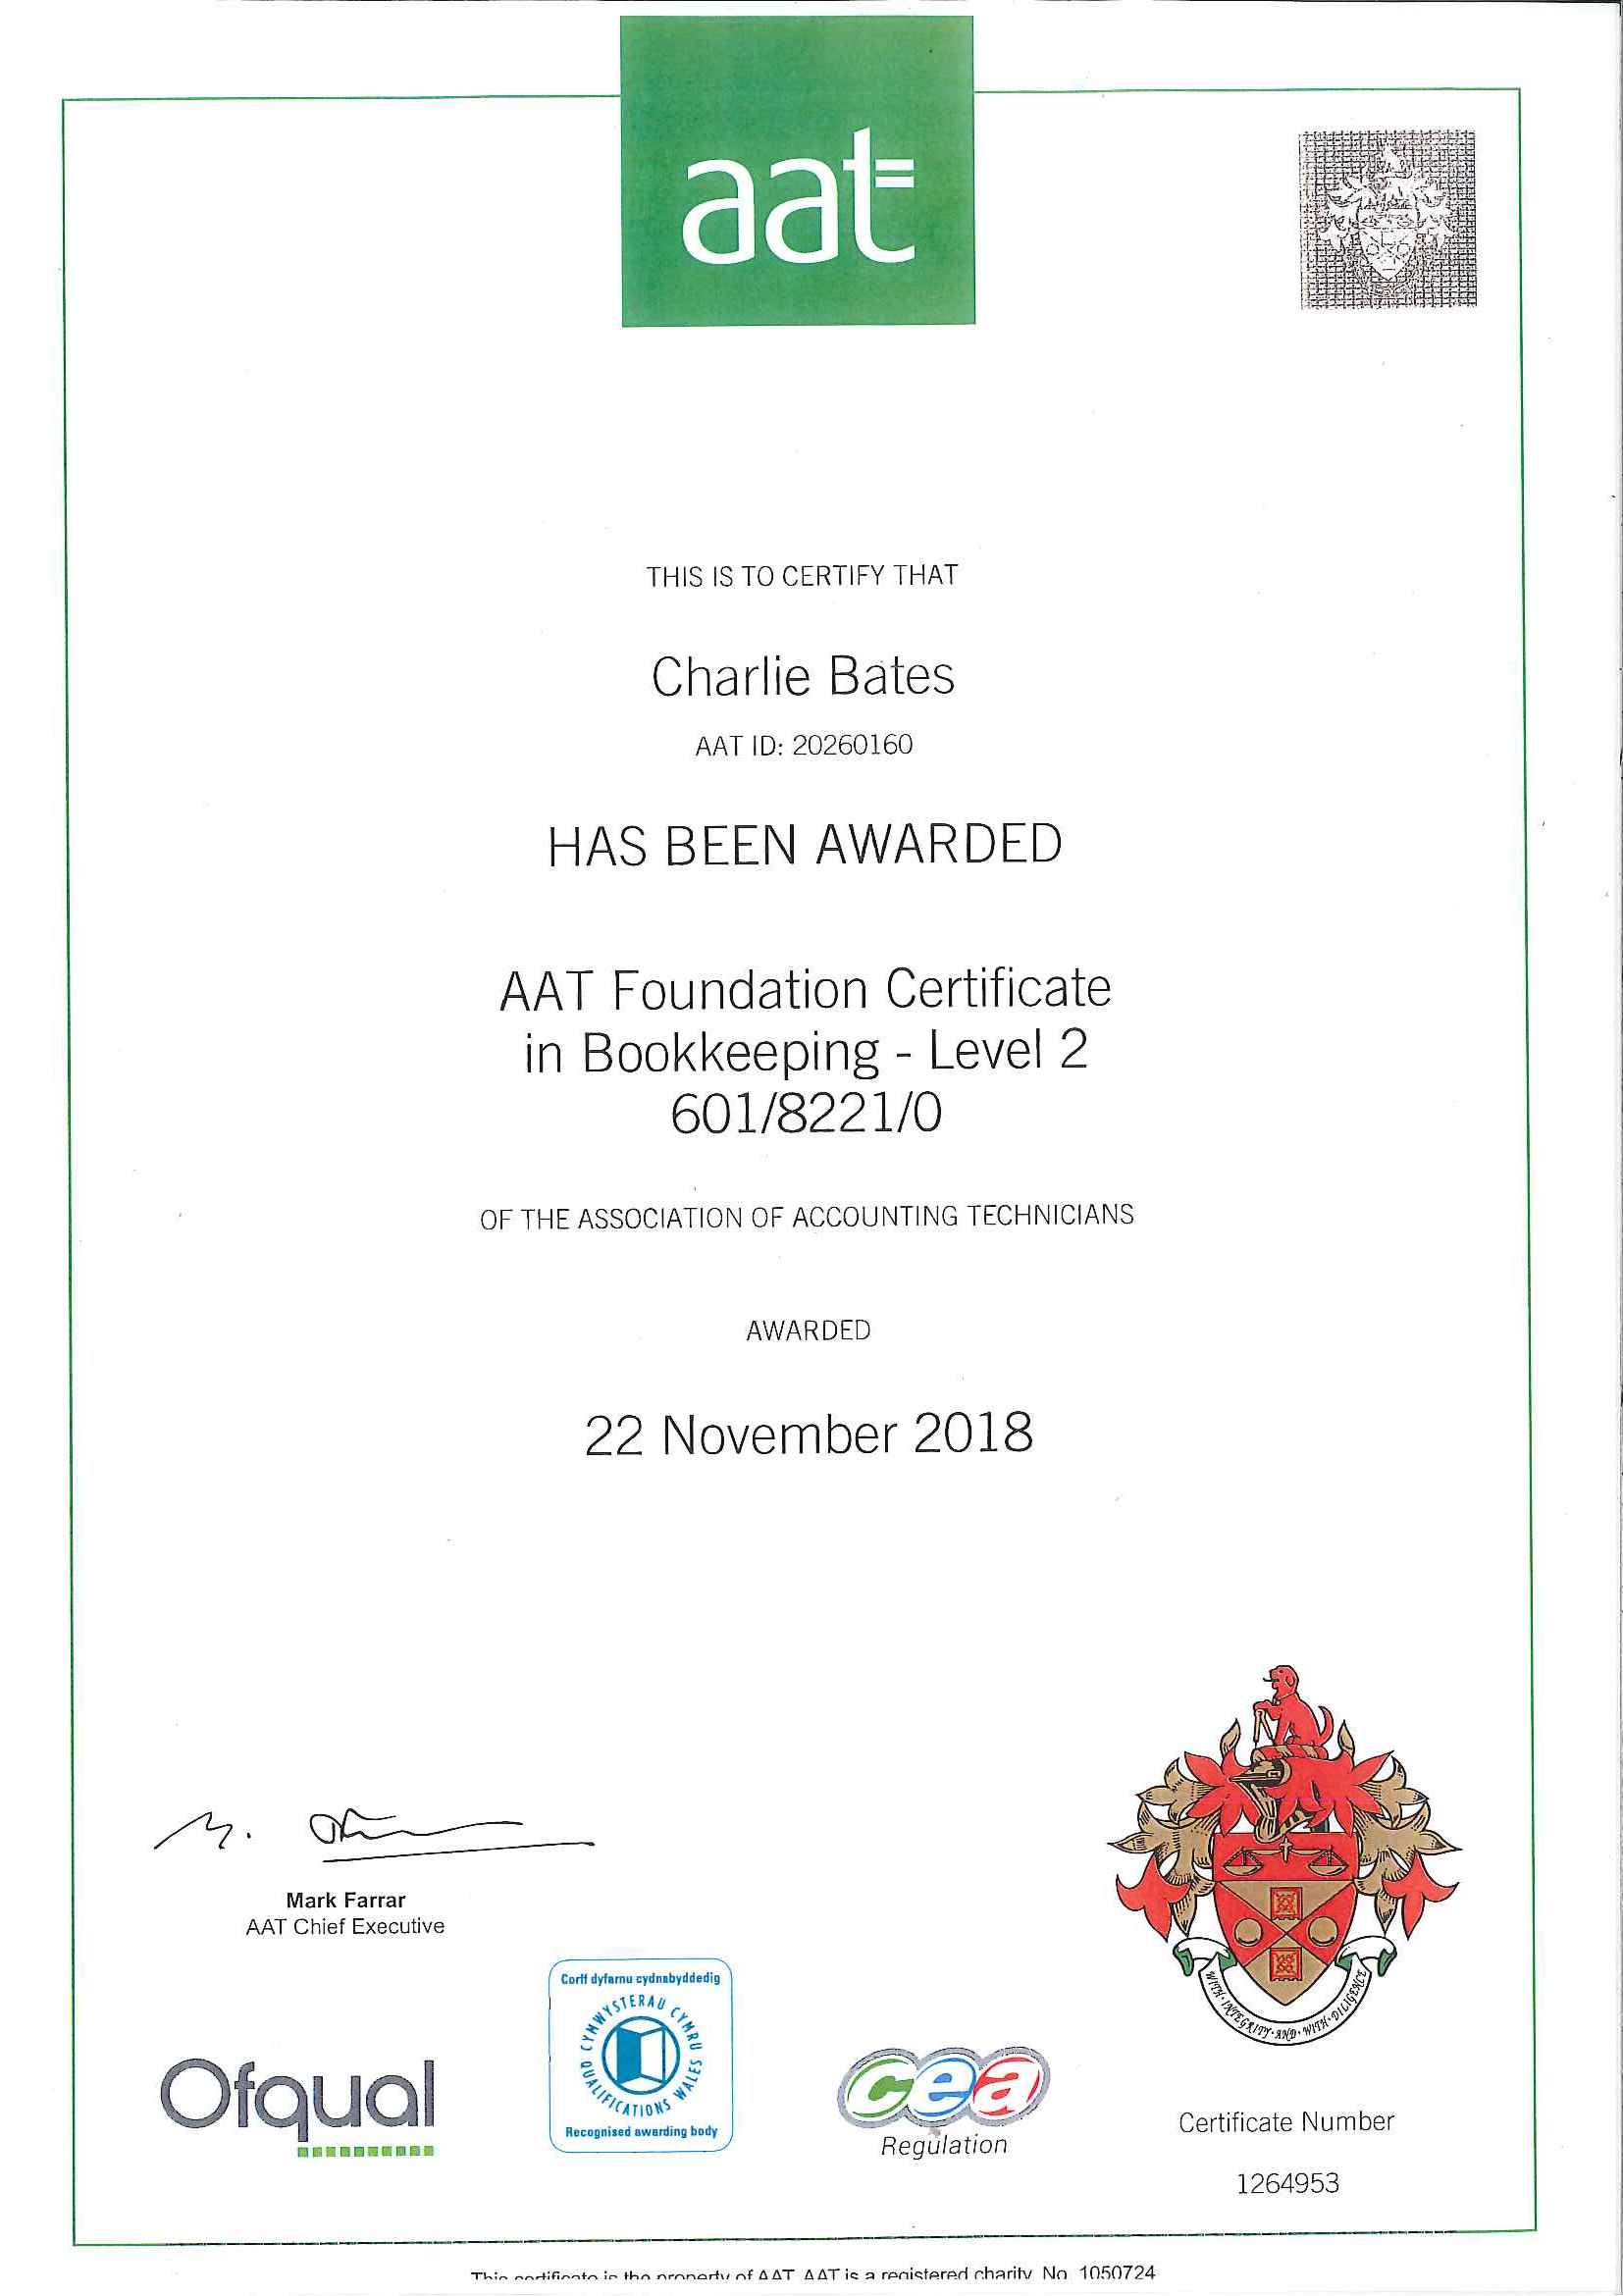 Charlie's Level 2 AAT Bookkeeping Certificate.